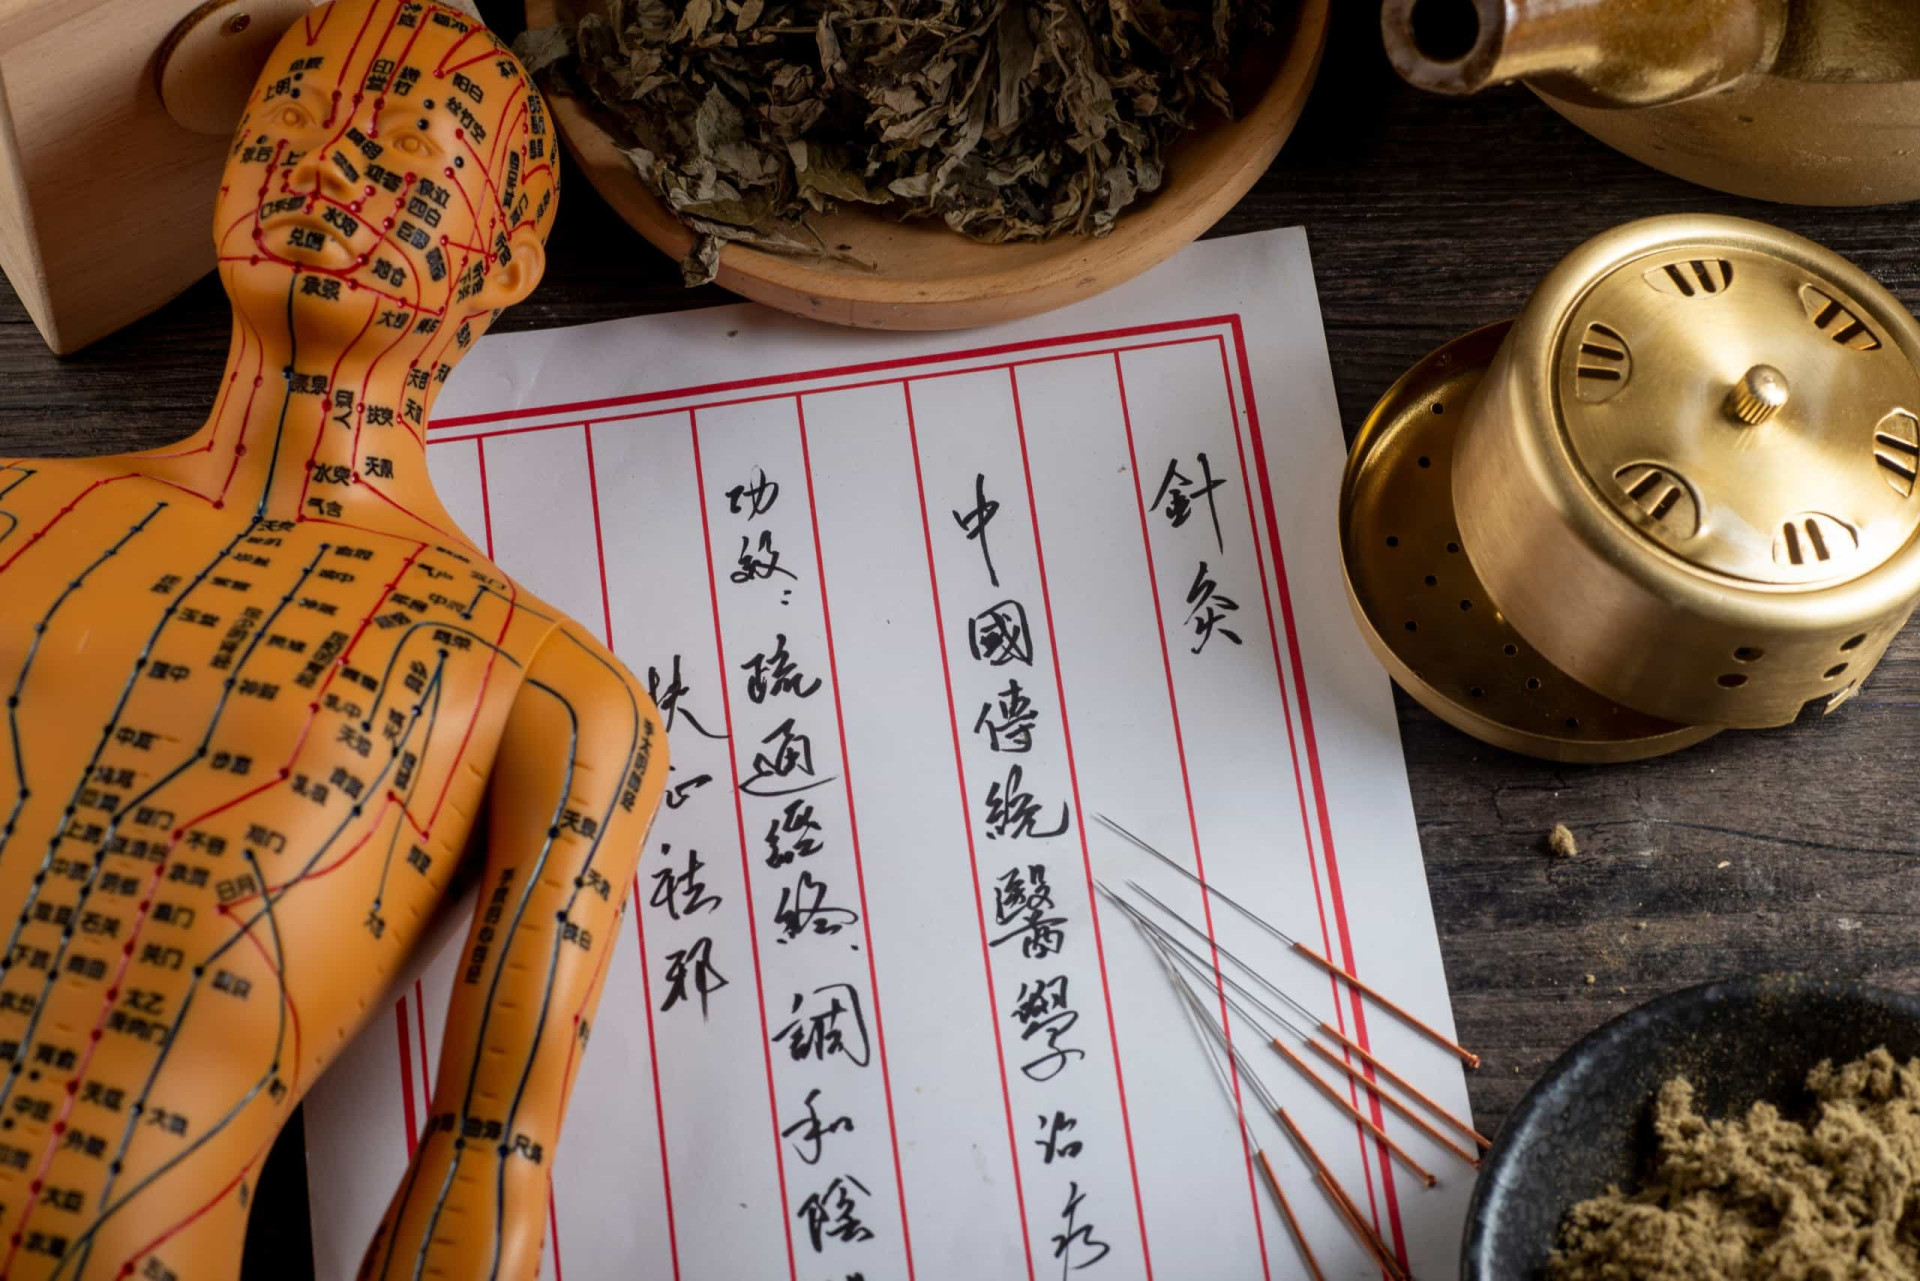 <p>Acupuncture is an ancient practice that started in China around 3,000 years ago. It was first documented as an organized system of diagnosis and treatment in 'The Yellow Emperor's Classic of Internal Medicine,' which dates back to 100 BCE.</p><p><a href="https://www.msn.com/en-us/community/channel/vid-7xx8mnucu55yw63we9va2gwr7uihbxwc68fxqp25x6tg4ftibpra?cvid=94631541bc0f4f89bfd59158d696ad7e">Follow us and access great exclusive content every day</a></p>